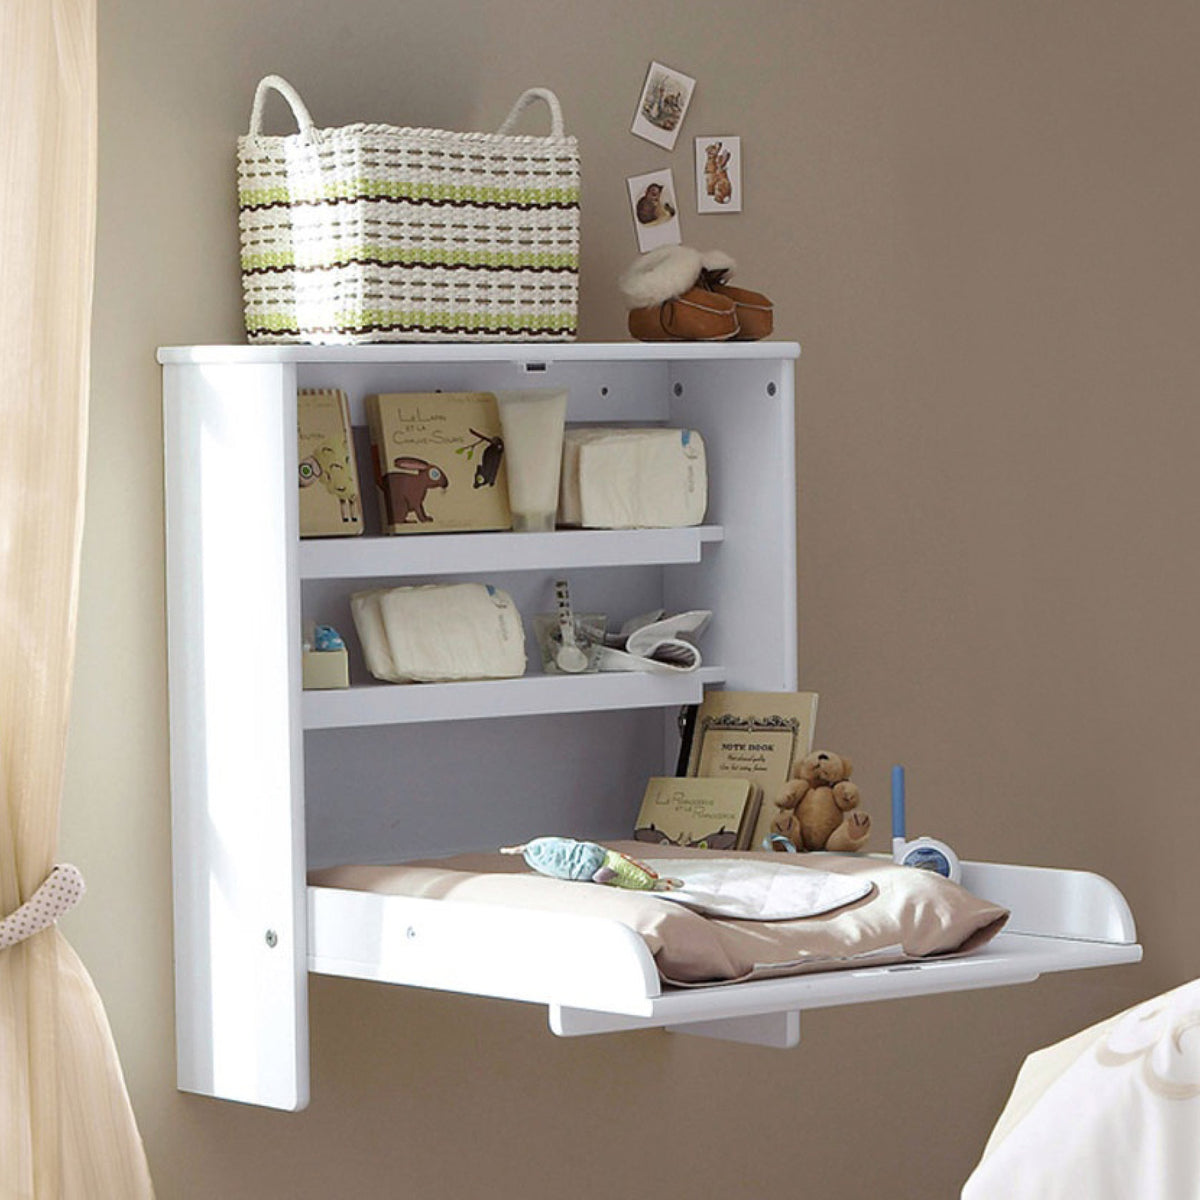 Wallhanging changing unit